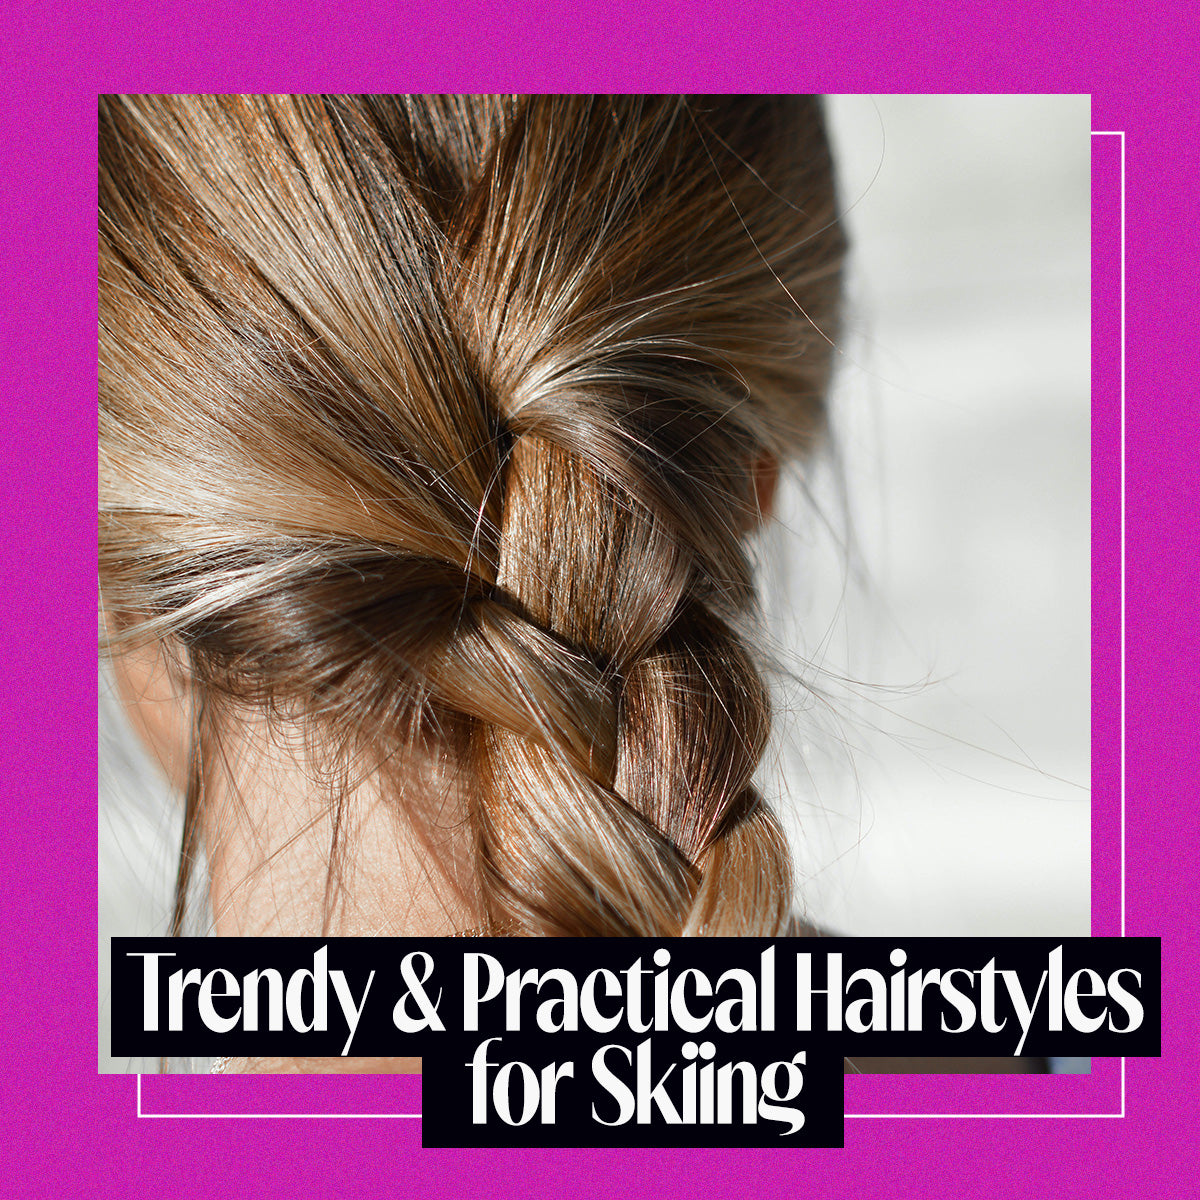 Trendy and Practical Hairstyles for Skiing